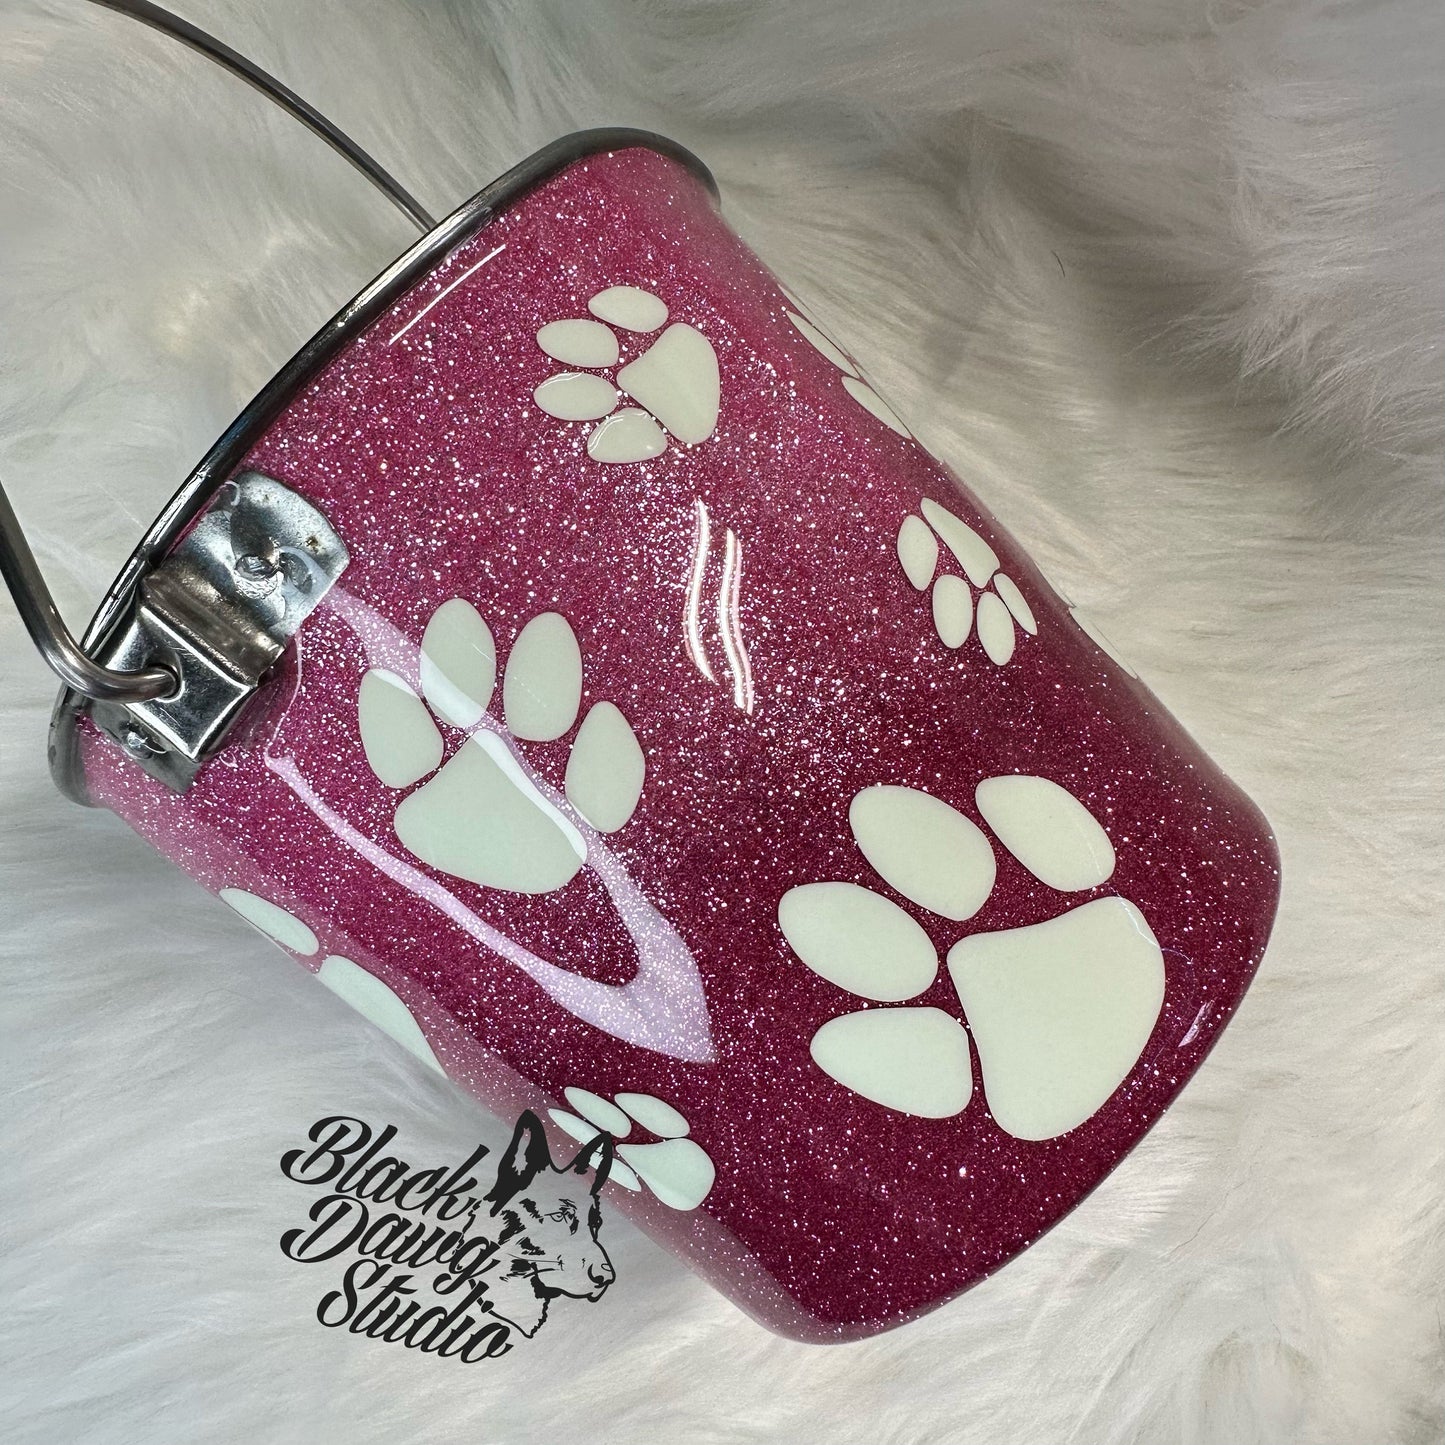 Dog Tumblers - Water Bucket Pail Food Bowl- Epoxy Tumbler for Dogs - Glitter Ombré with Paw Prints Create Your Own